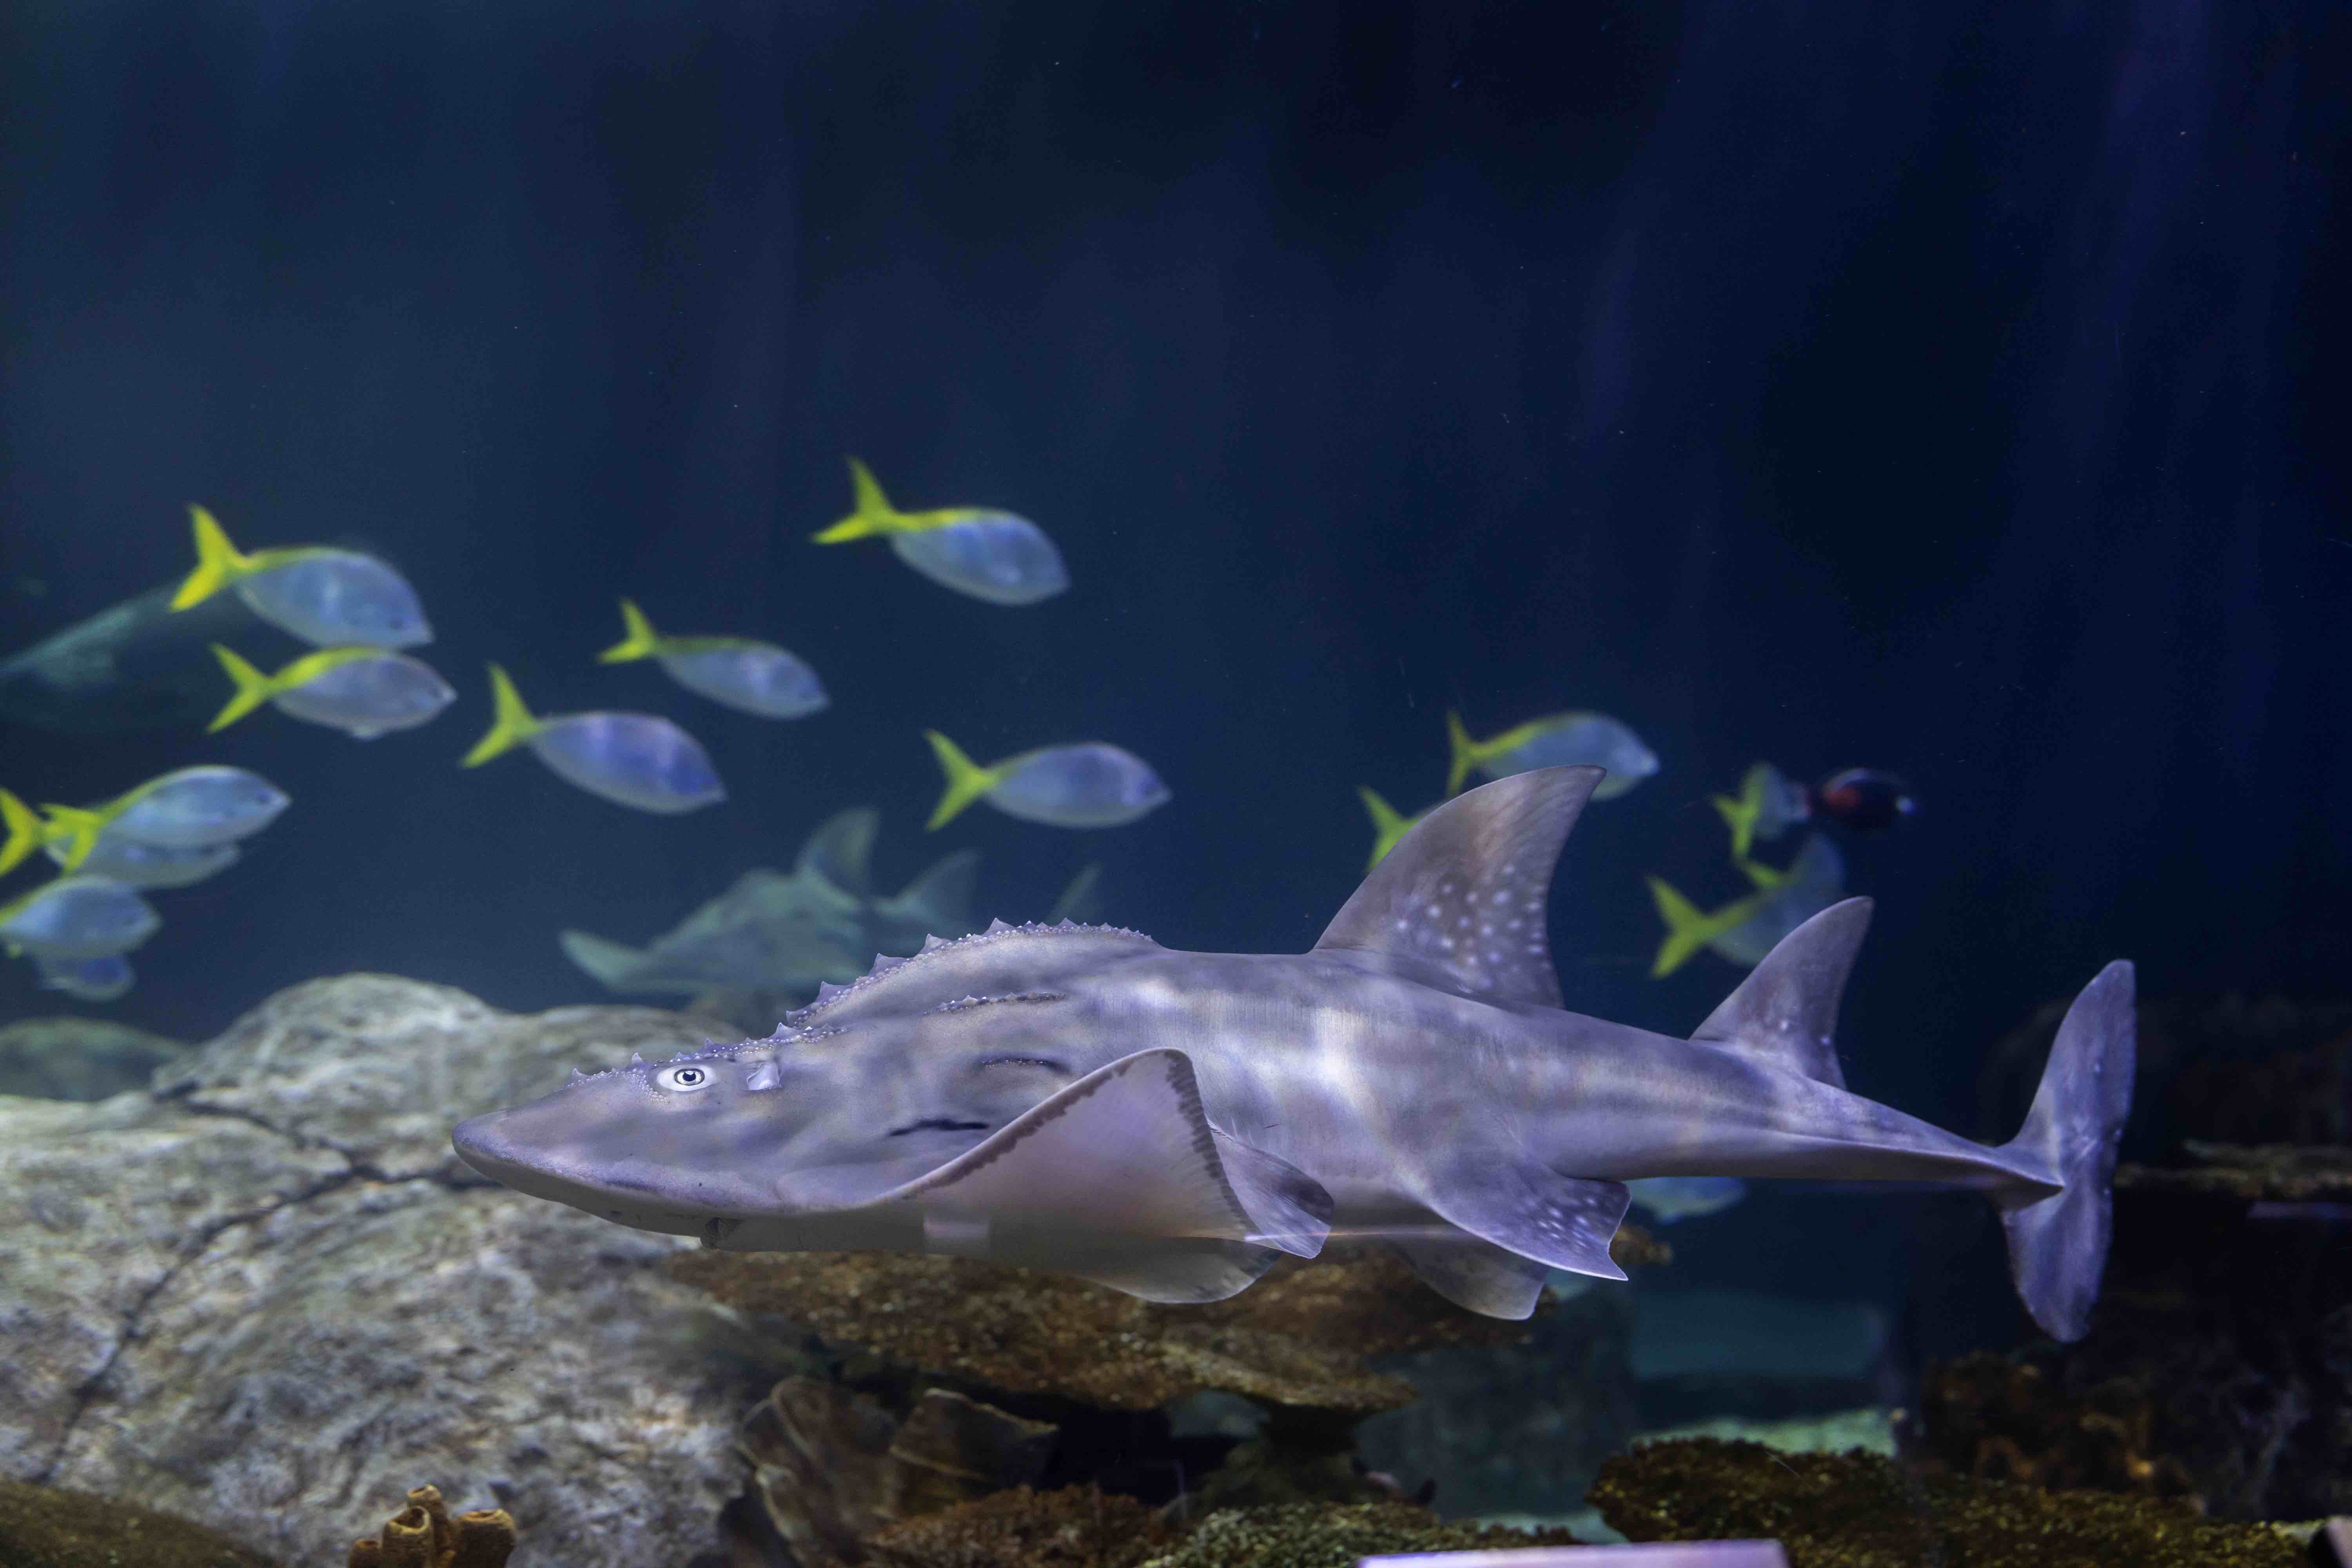 These Baby Shark Rays Are Among the Most Threatened Marine Life on